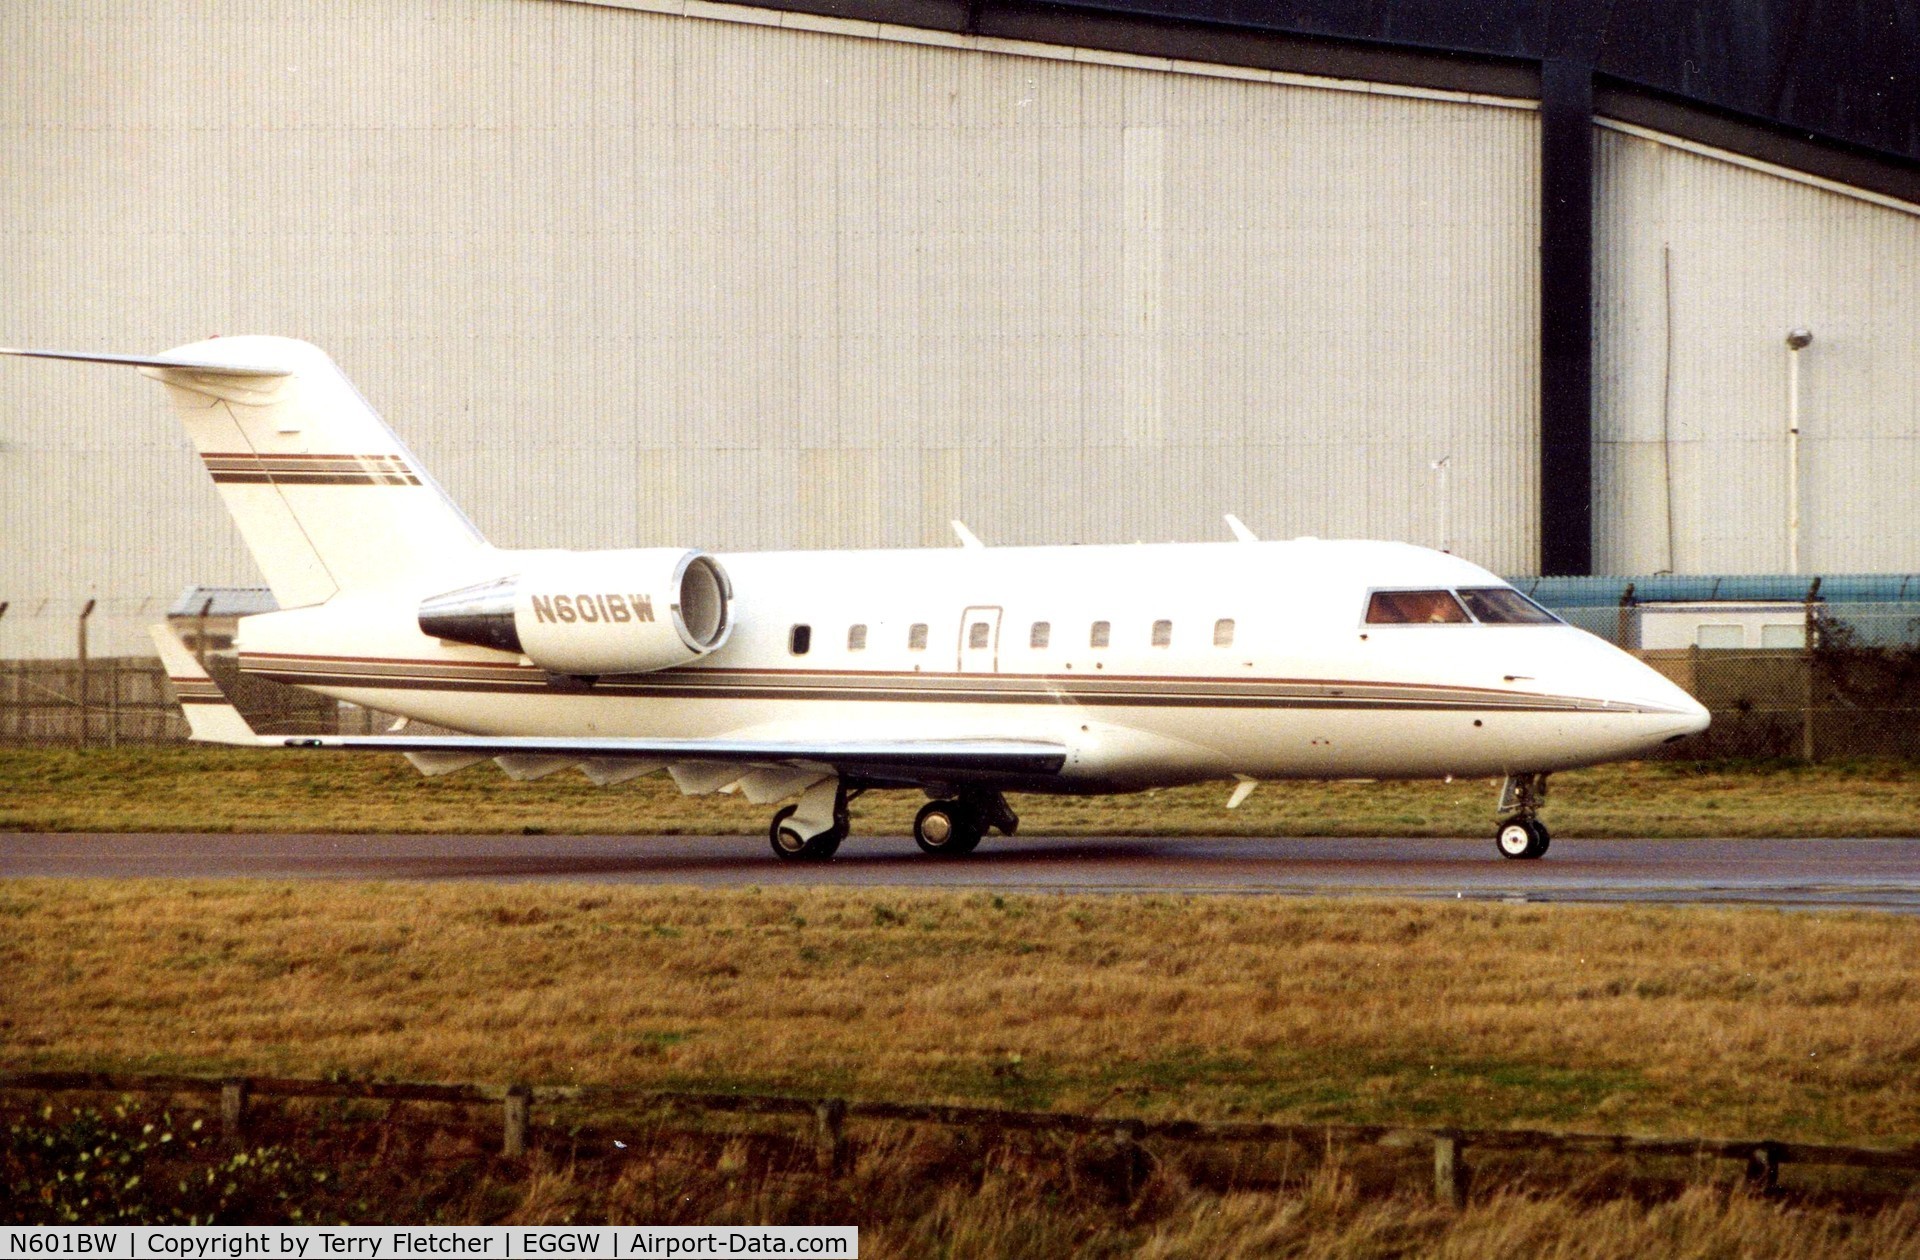 N601BW, 1994 Canadair Challenger 601-3R (CL-600-2B16) C/N 5150, Challenger 601 at Luton